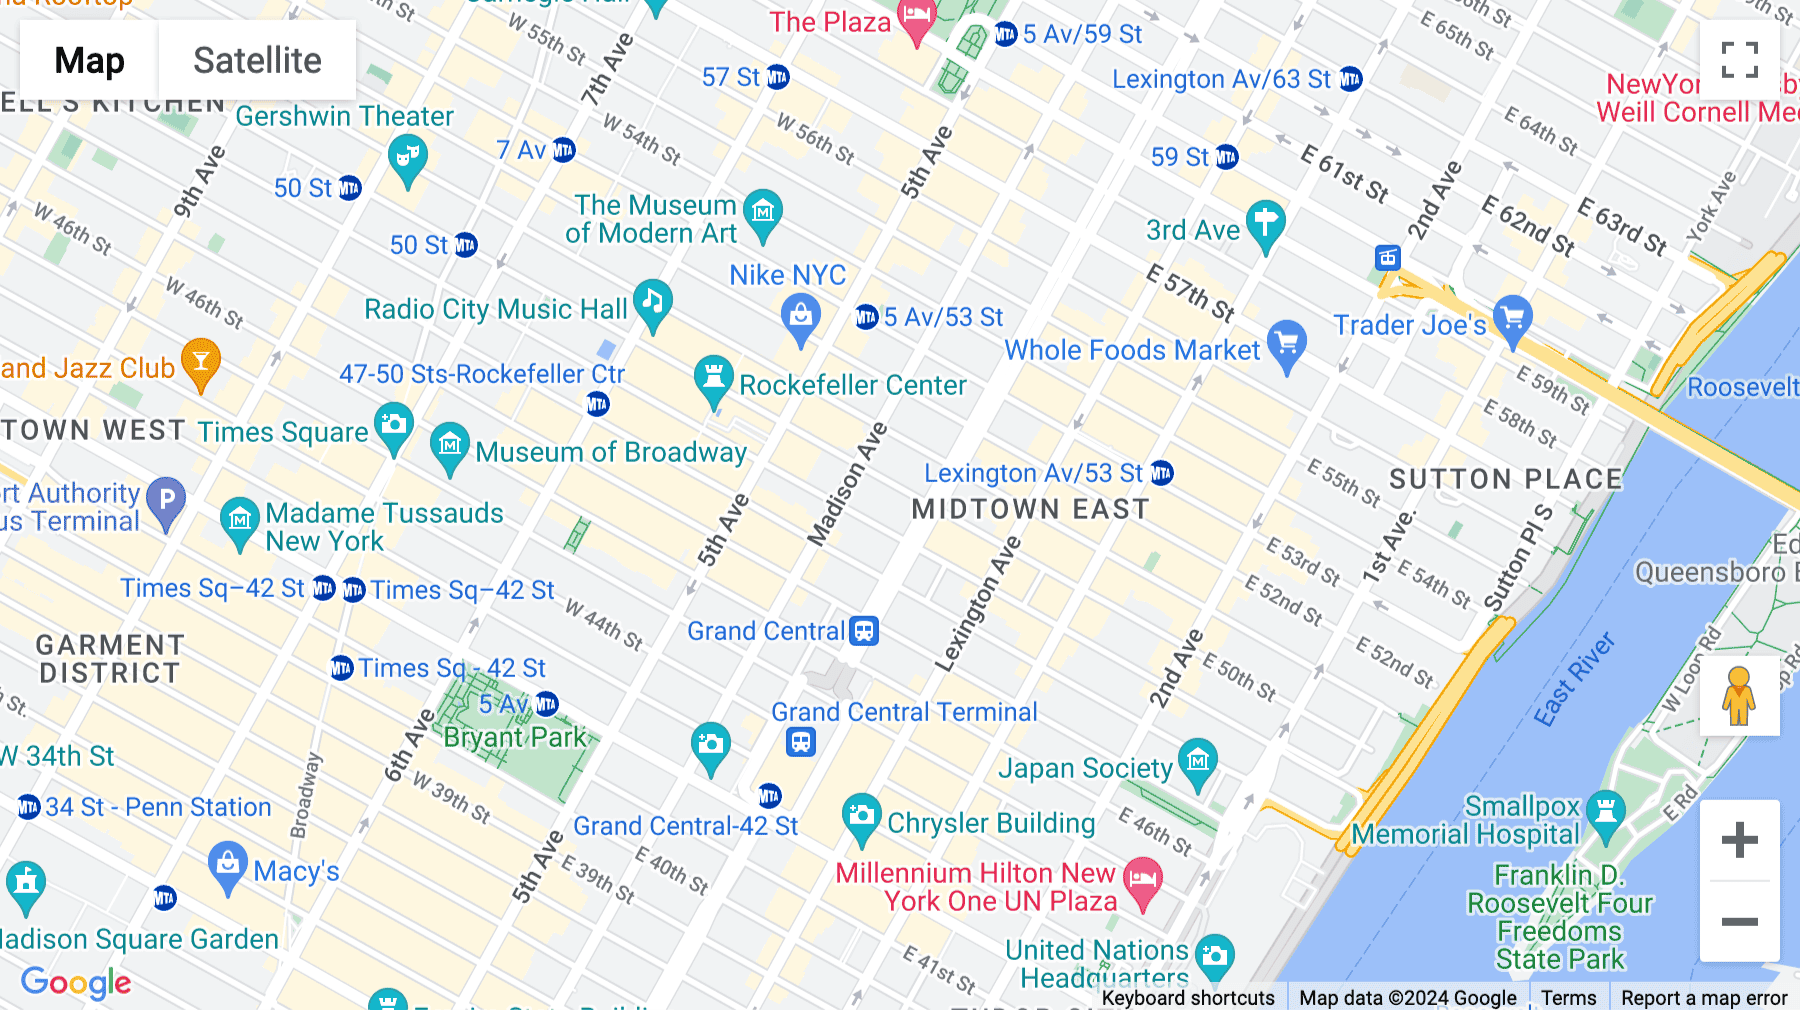 Click for interative map of 2nd Floor, 300 Park Avenue, New York City